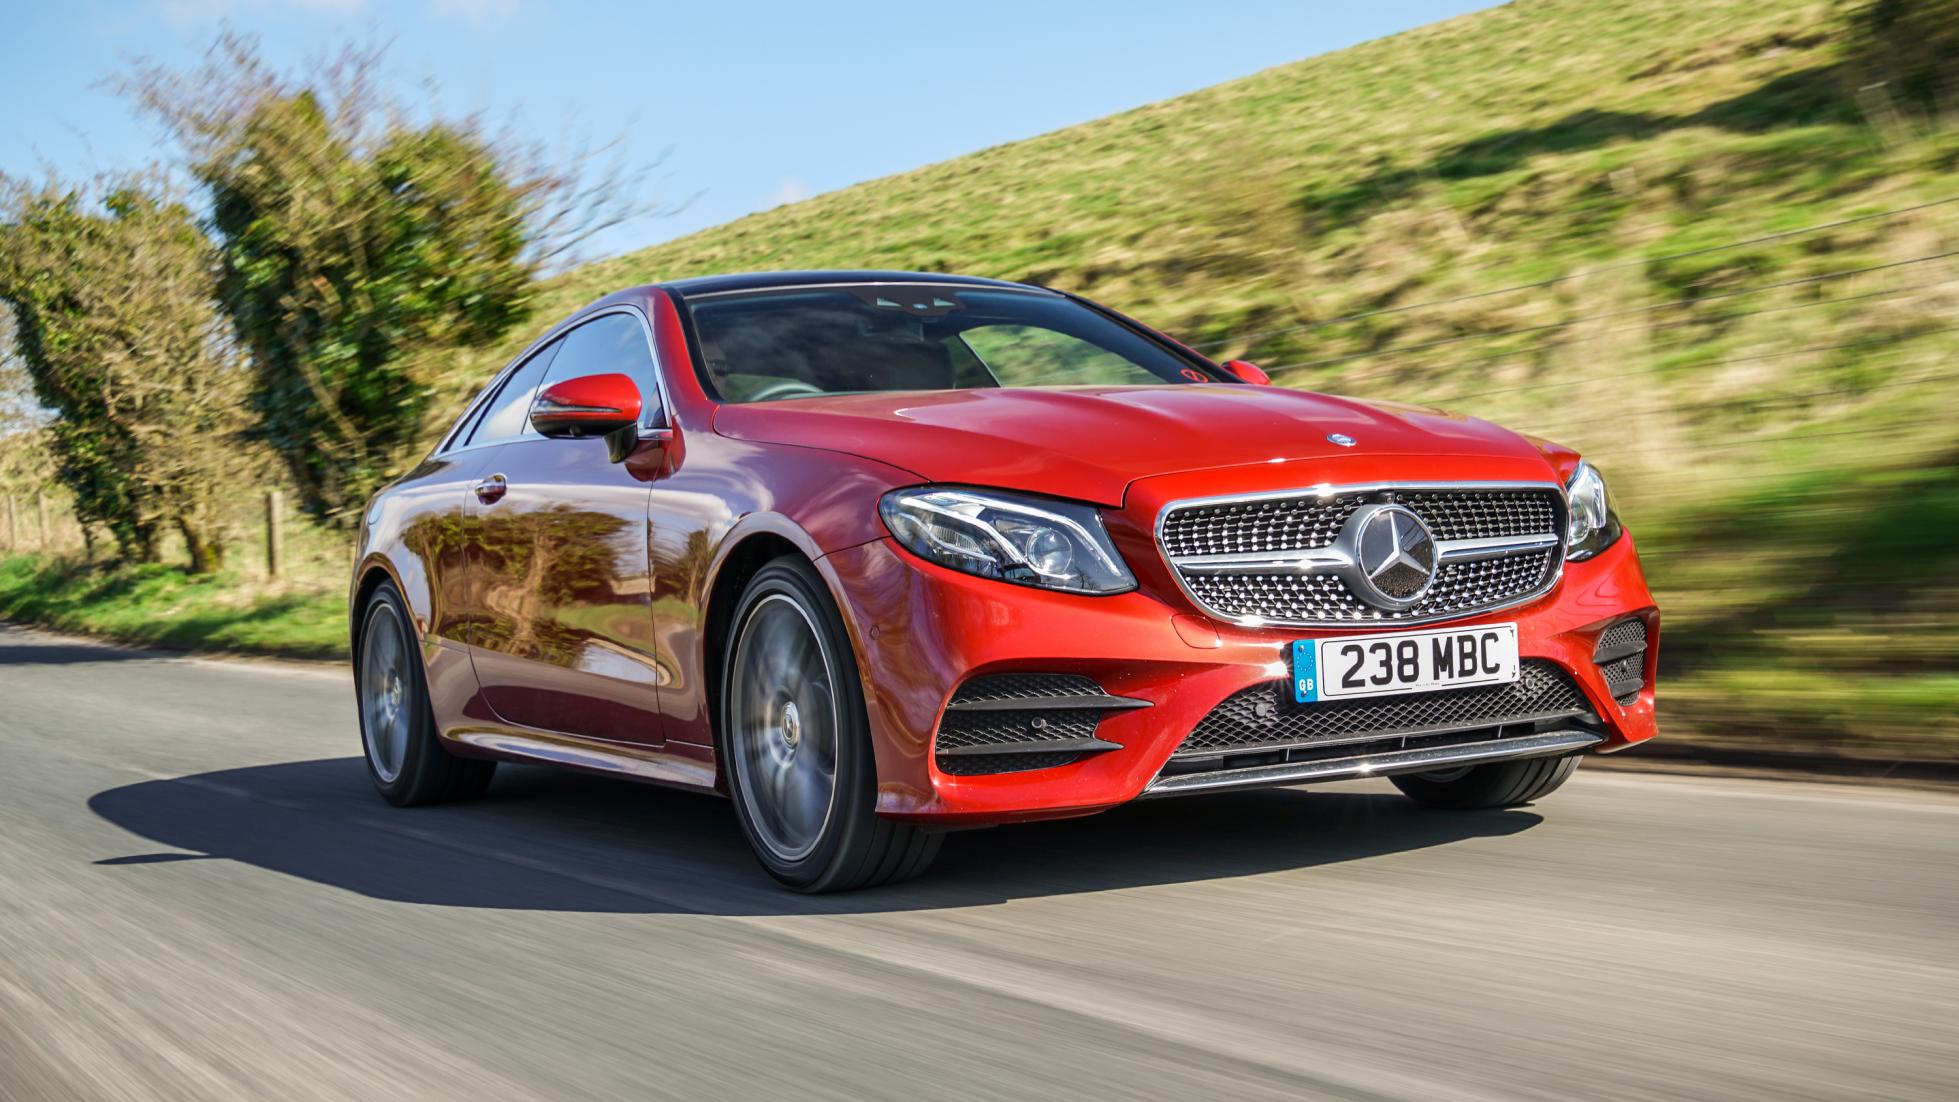 Assimilate Portico blanding Top Gear on Twitter: ""The E-Class Coupe is about looking good and  finishing every journey more refreshed than you began. It's Mercedes at its  imperious best..." The Top Gear car review: Mercedes-Benz